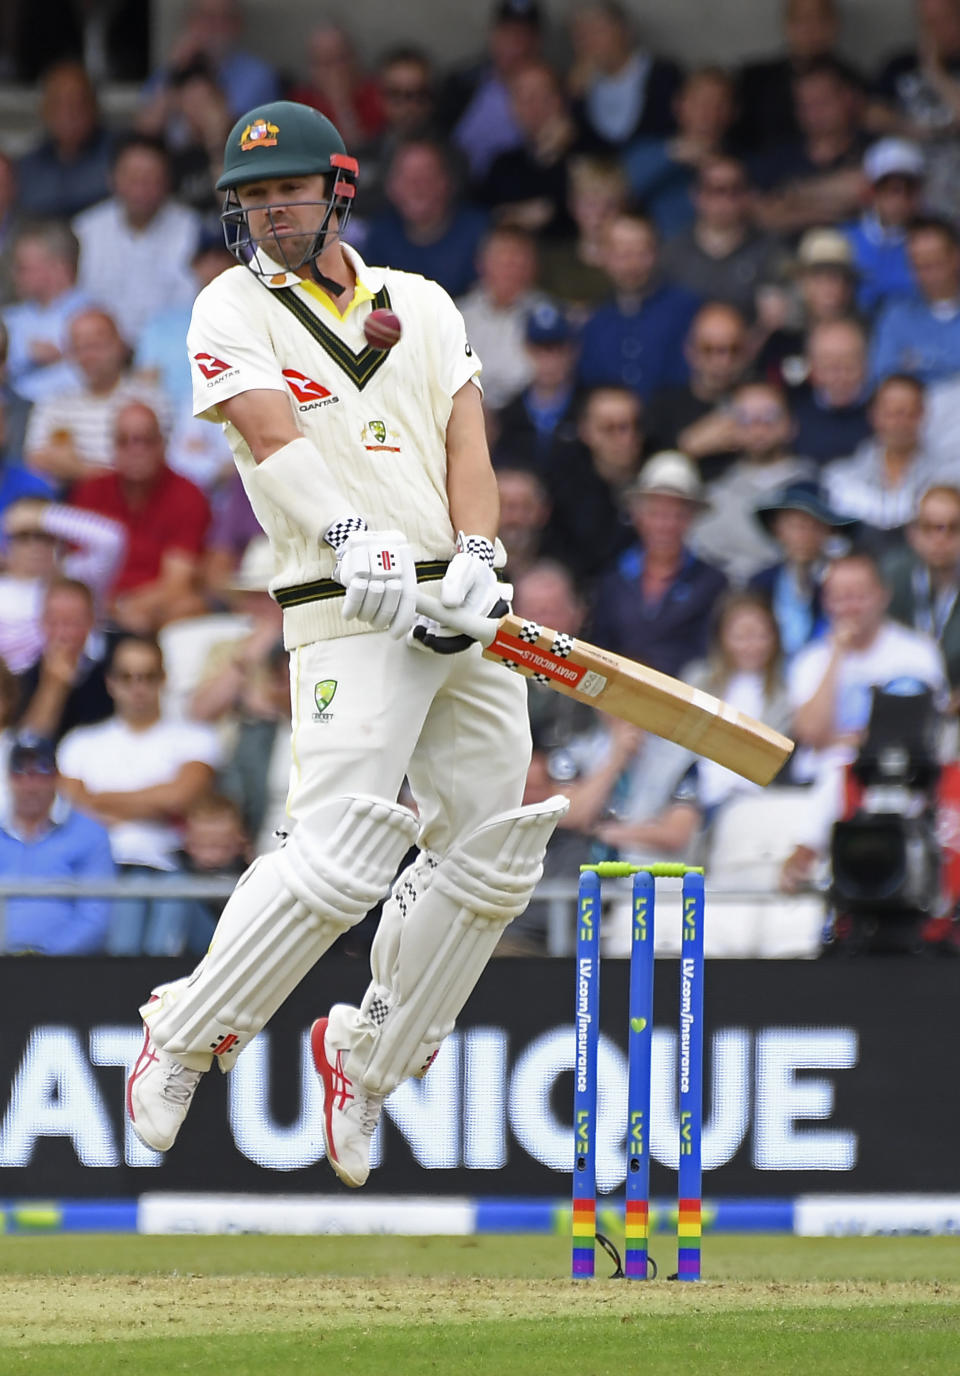 Australia's Travis Head bats during the first day of the third Ashes Test match between England and Australia at Headingley, Leeds, England, Thursday, July 6, 2023. (AP Photo/Rui Vieira)